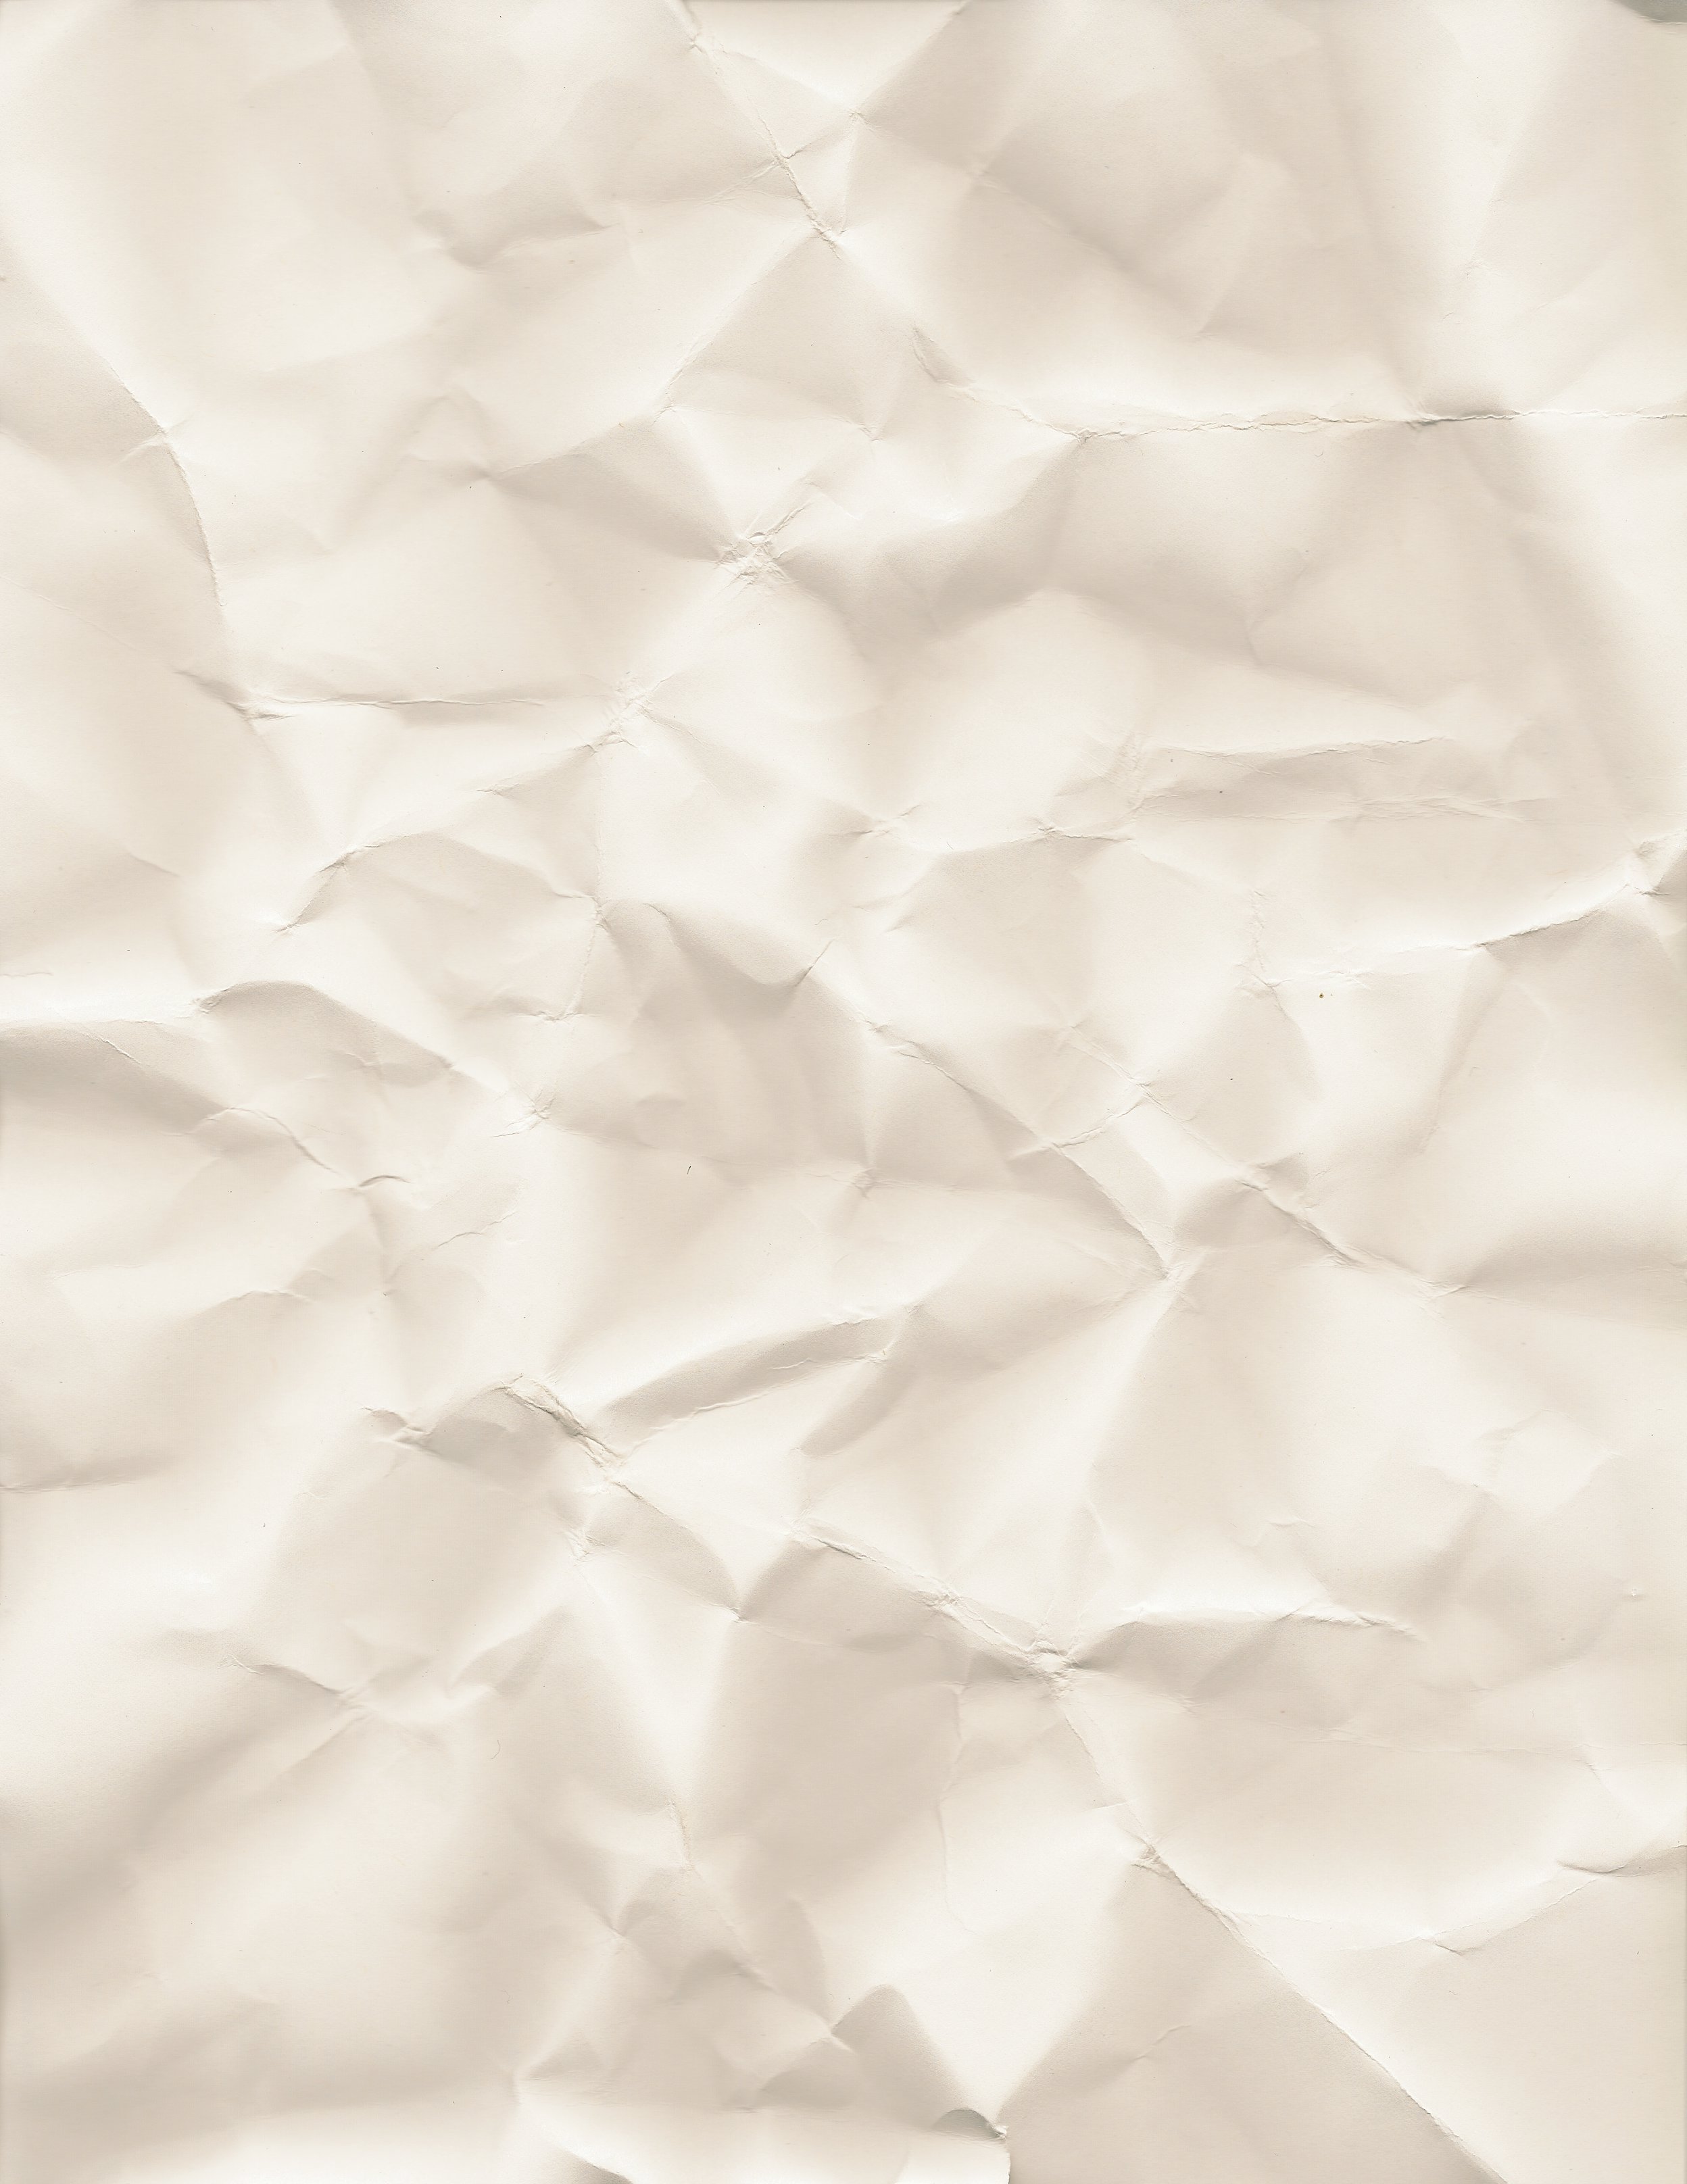 A Great Collection of Free High Resolution Paper Textures to Download